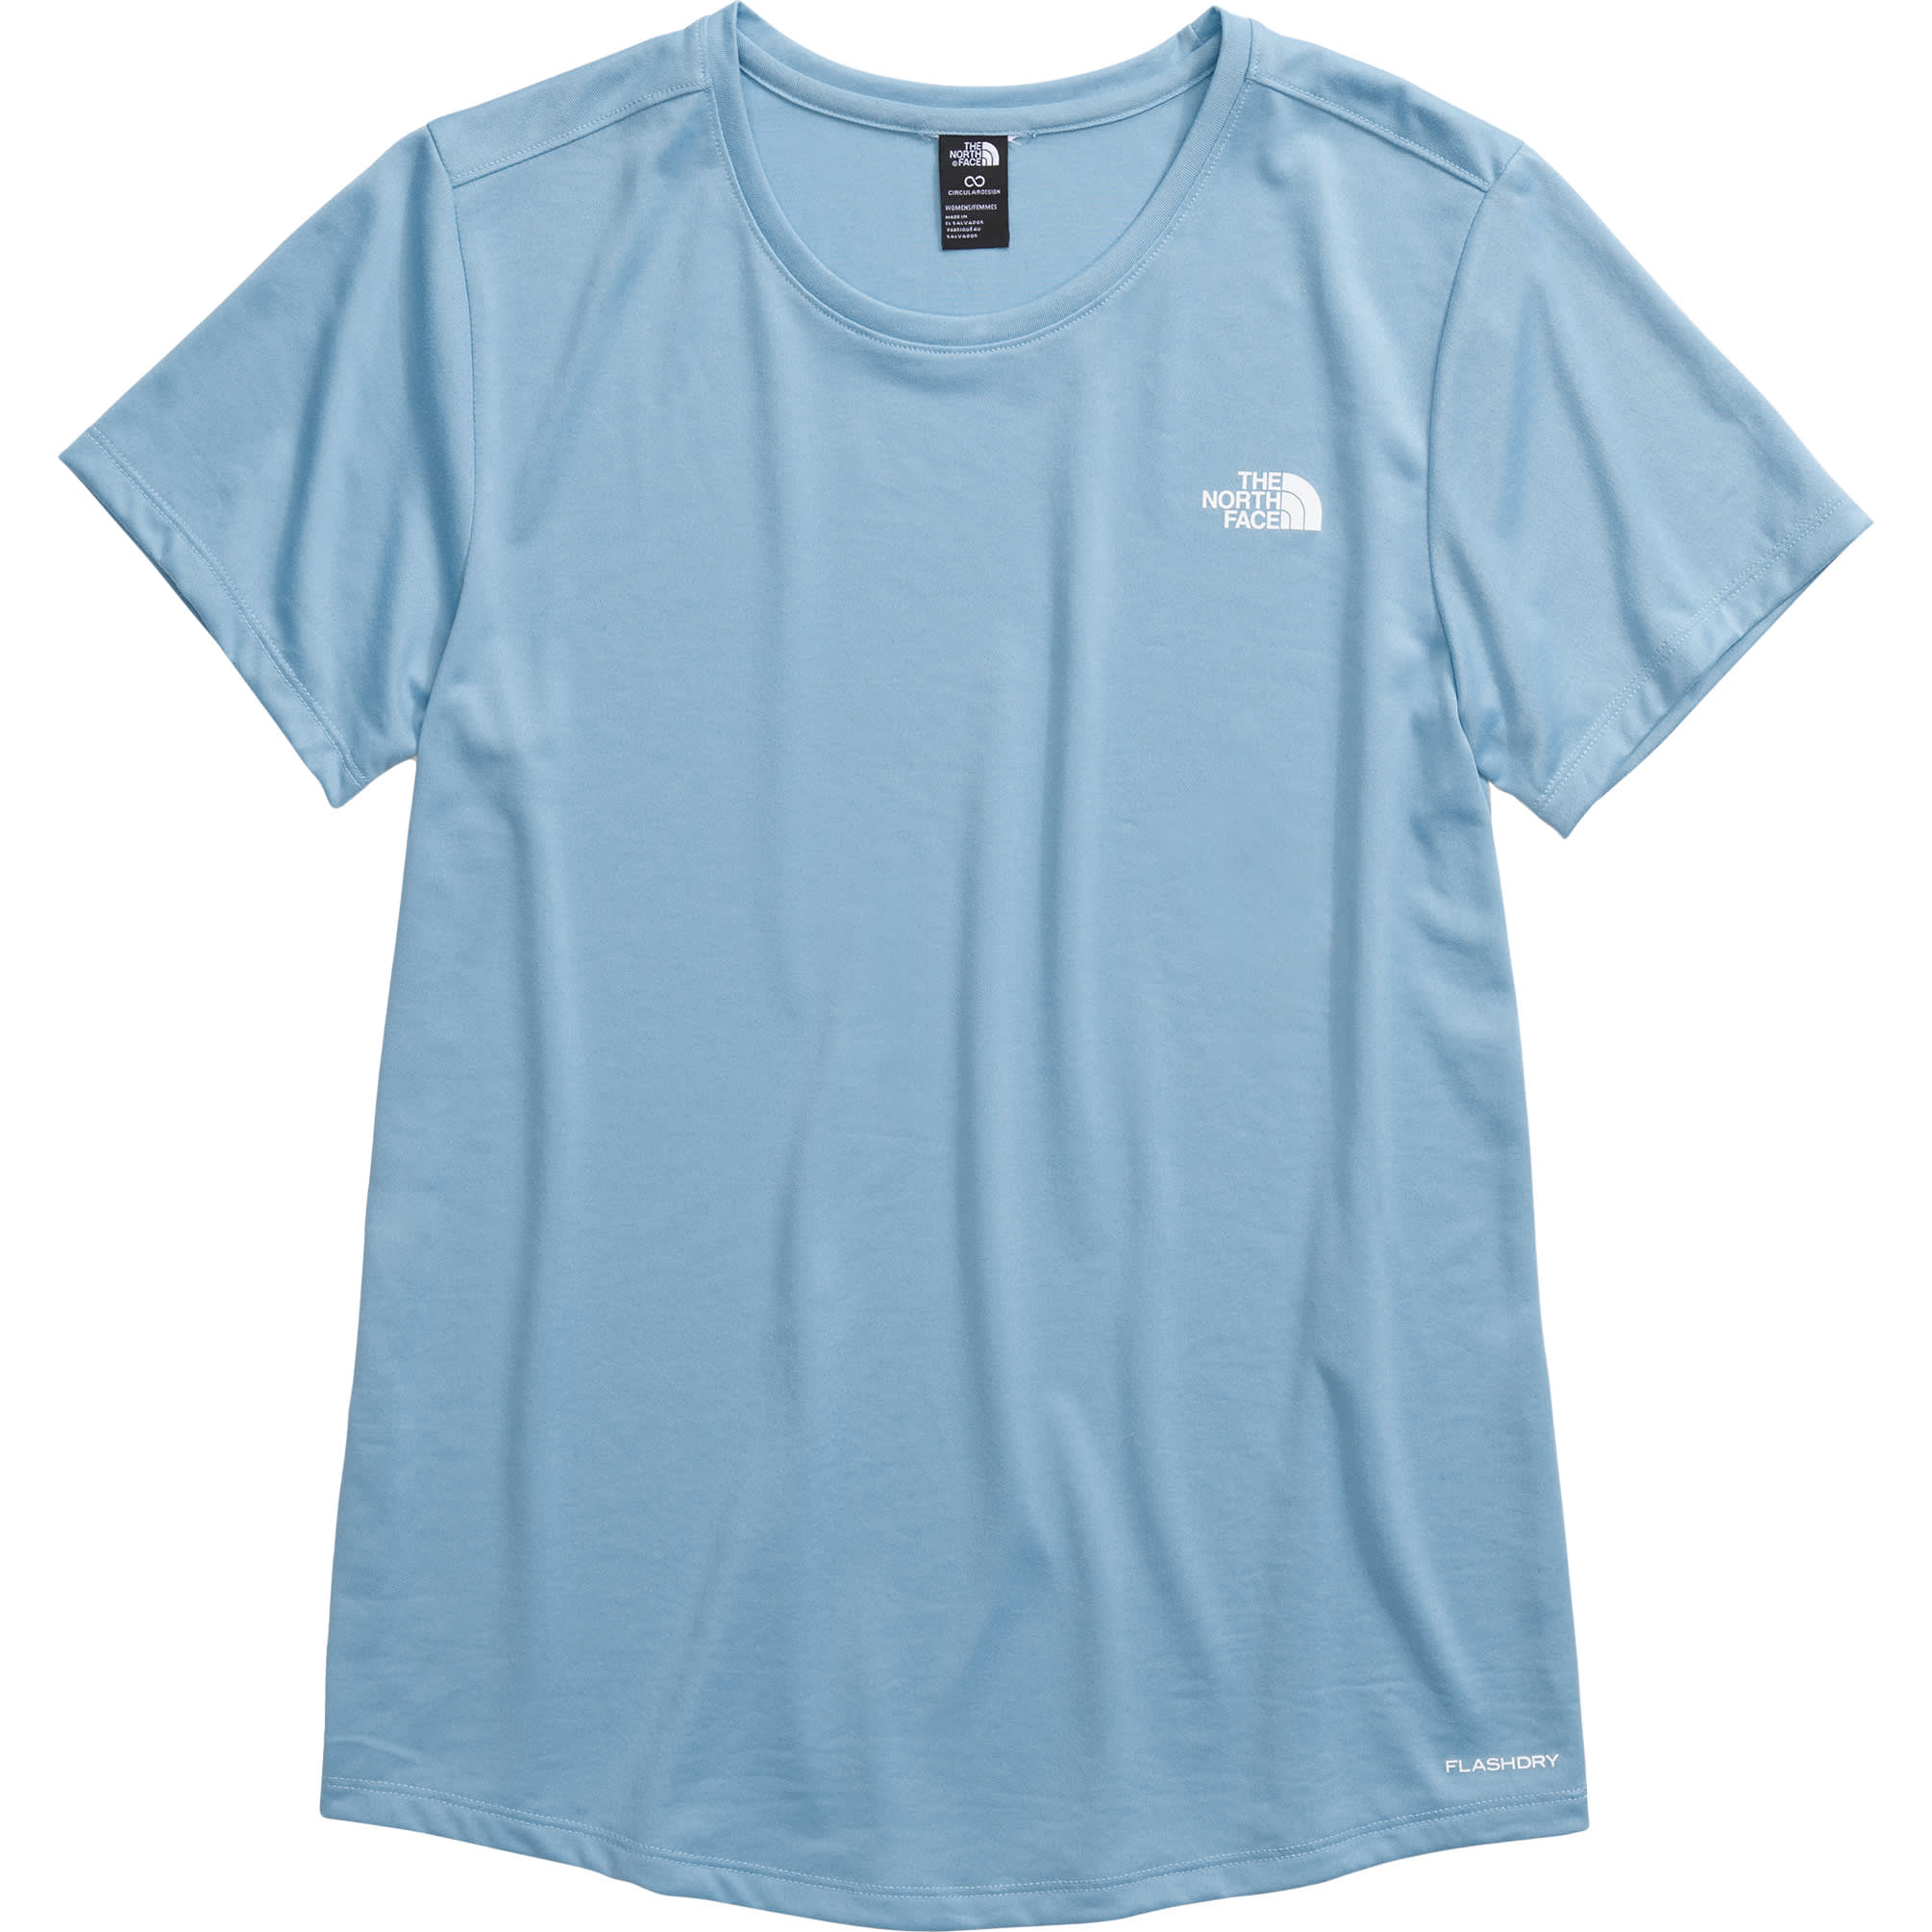 The North Face® Women’s Elevation Short Sleeve T-Shirt